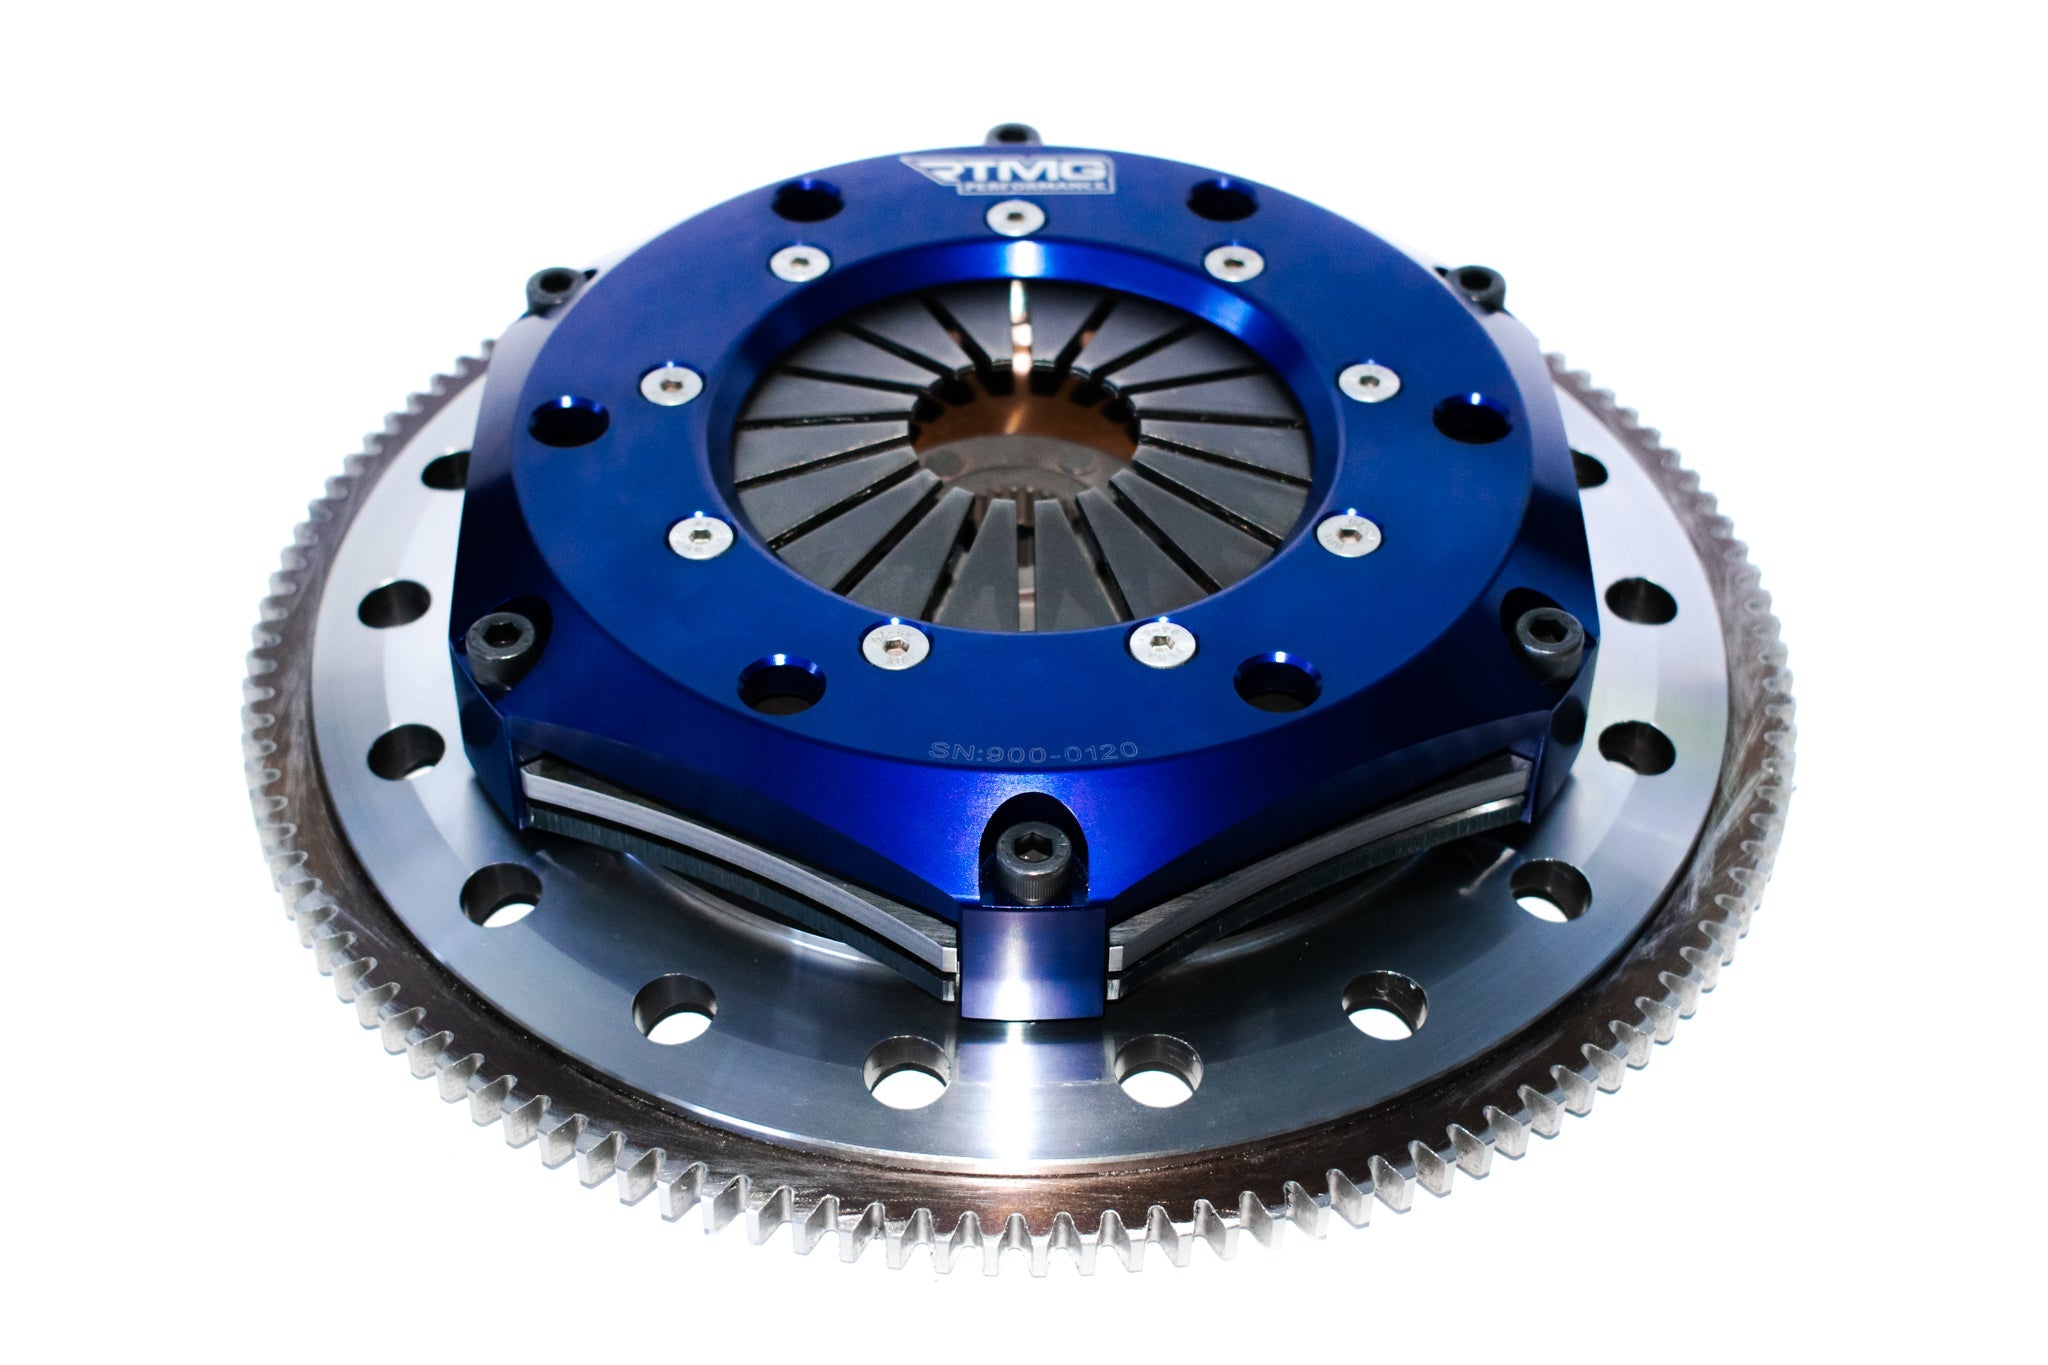 Twin Disk Clutch Kit for Honda K20 Engines - RTMG Performance